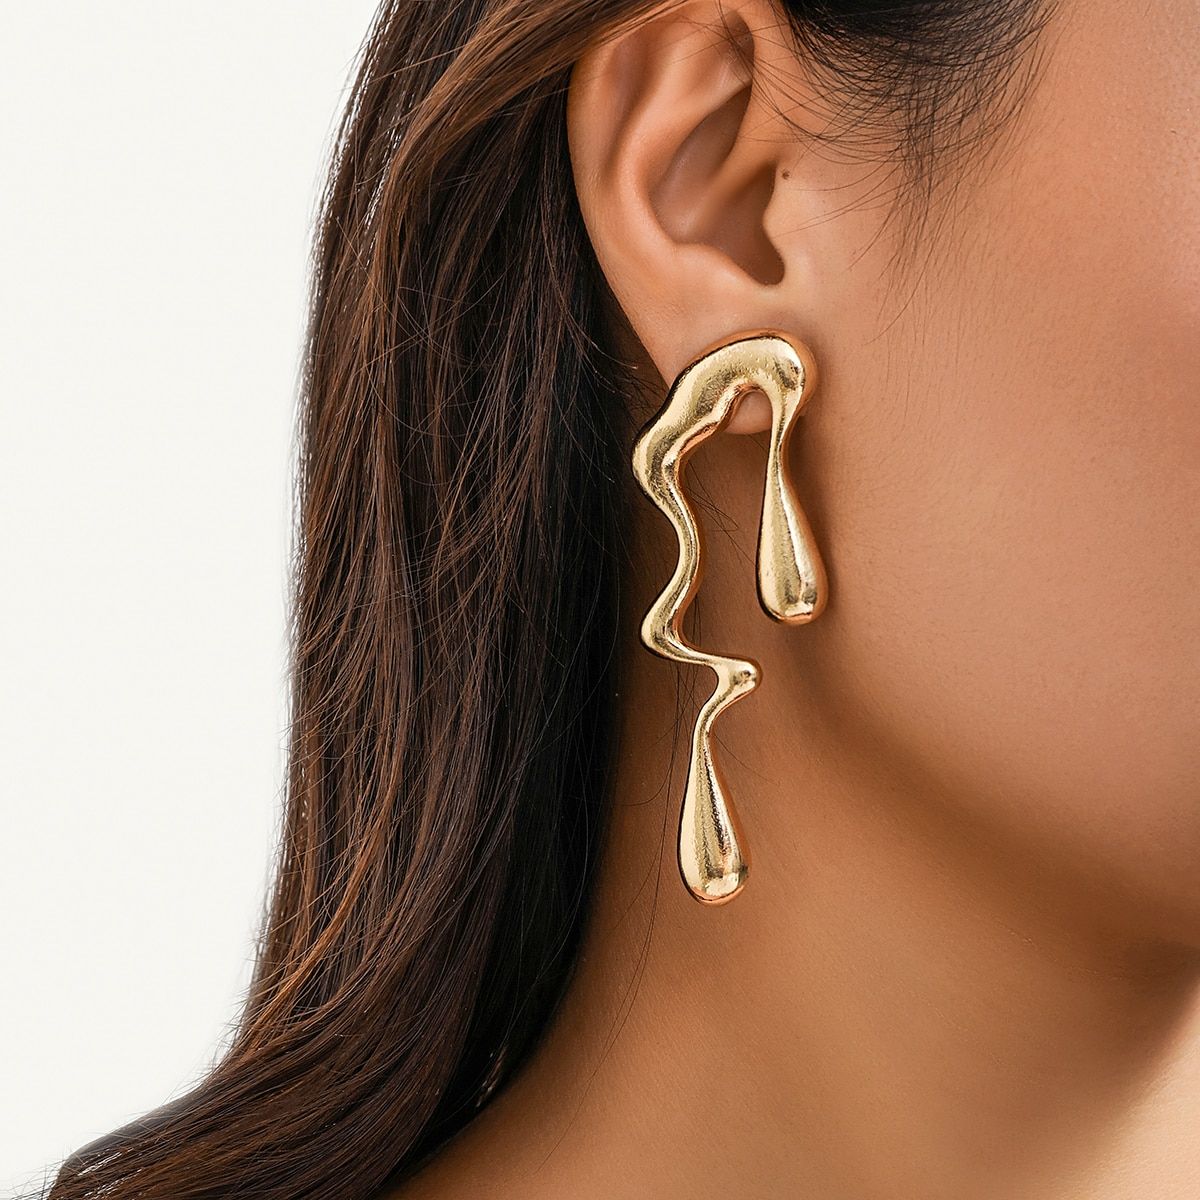 Close-up of a woman's ear showcasing a unique, Vintage Gold Geometric Water Drop Earrings, a bold statement in women's fashion accessories.